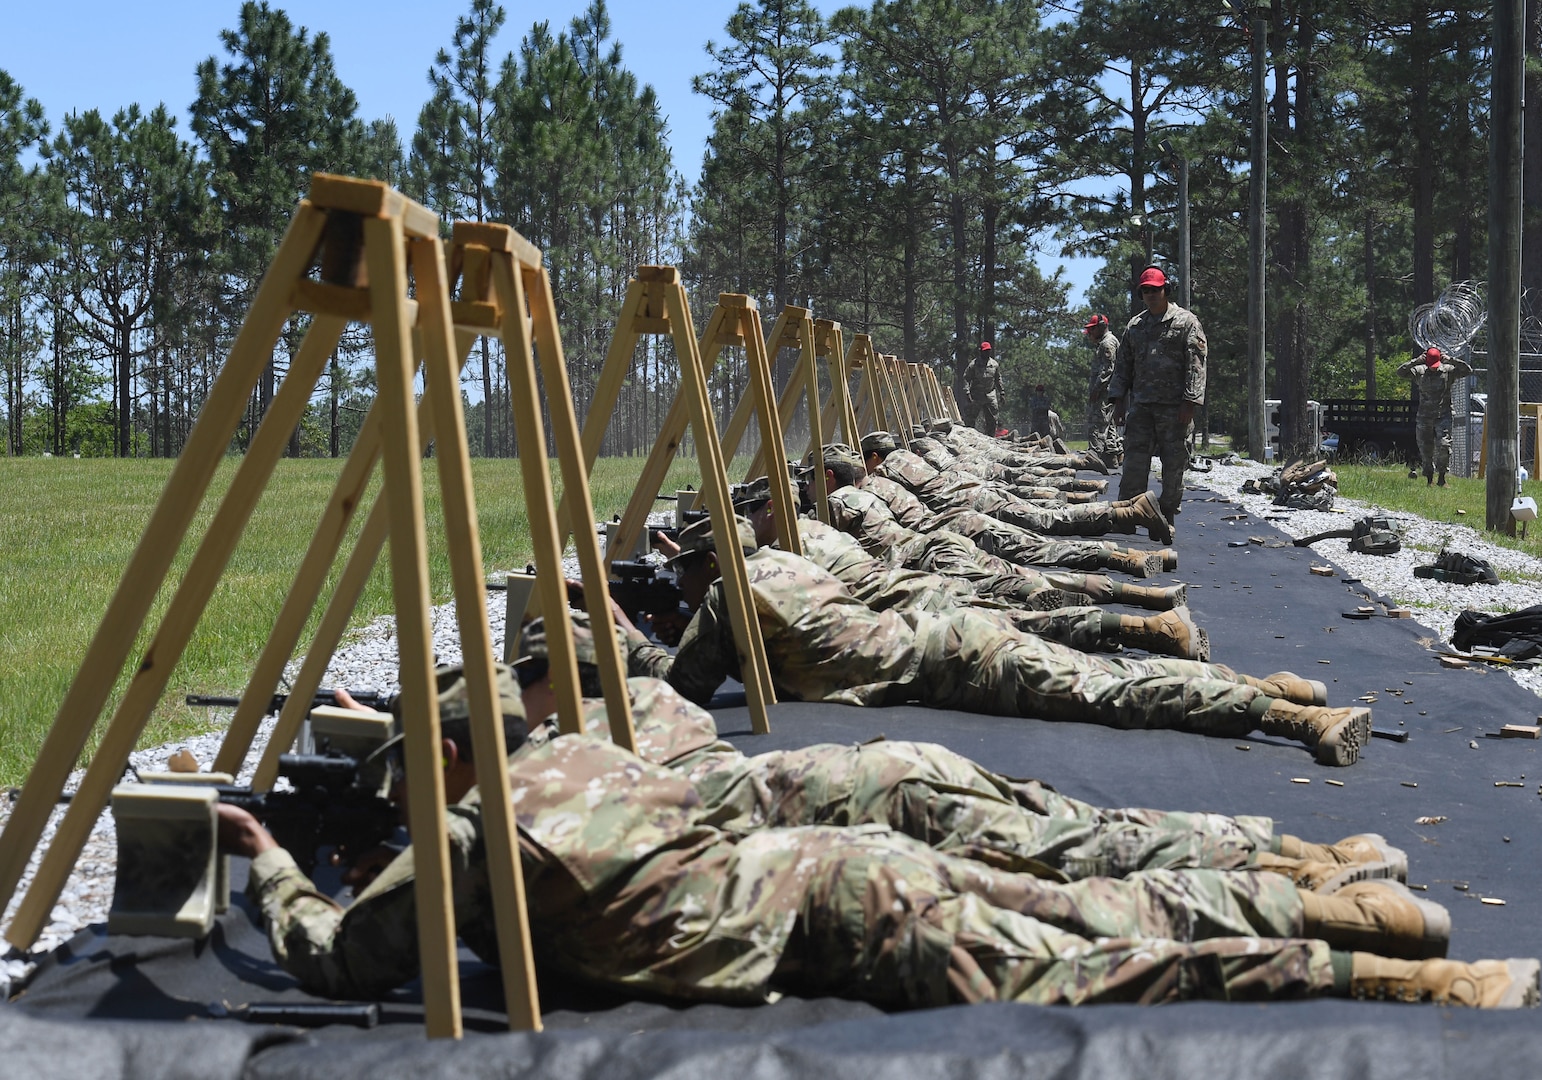 Airmen lay on ground firing weapons